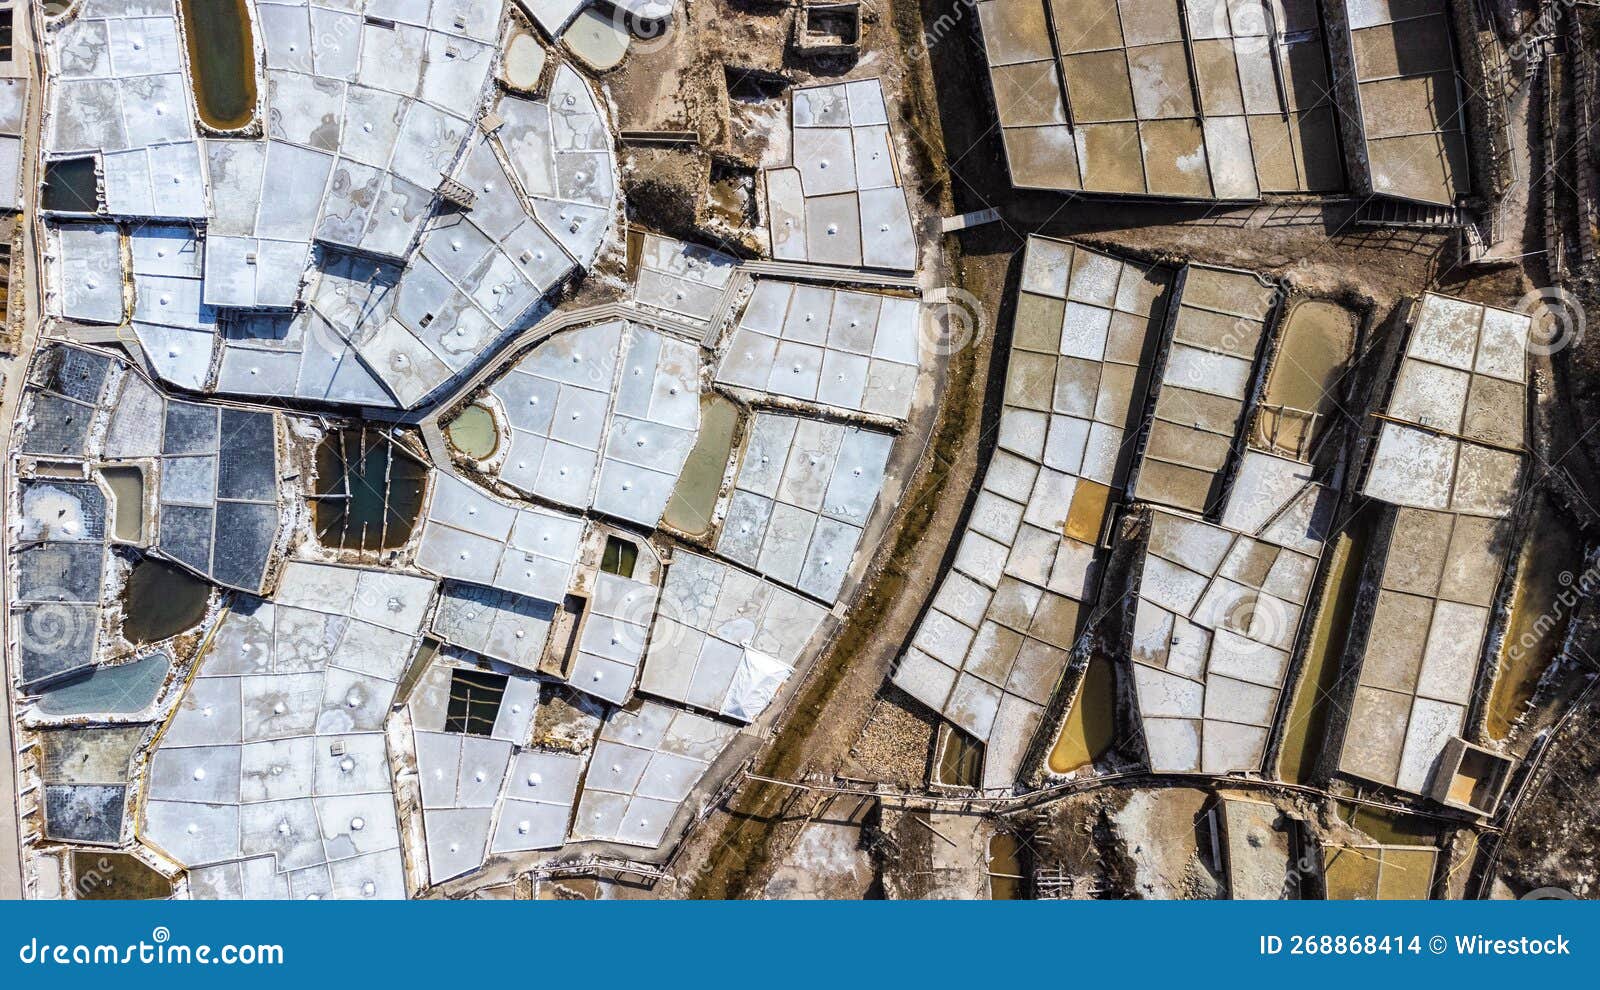 aerial view of the anana salt pans in alava, spain